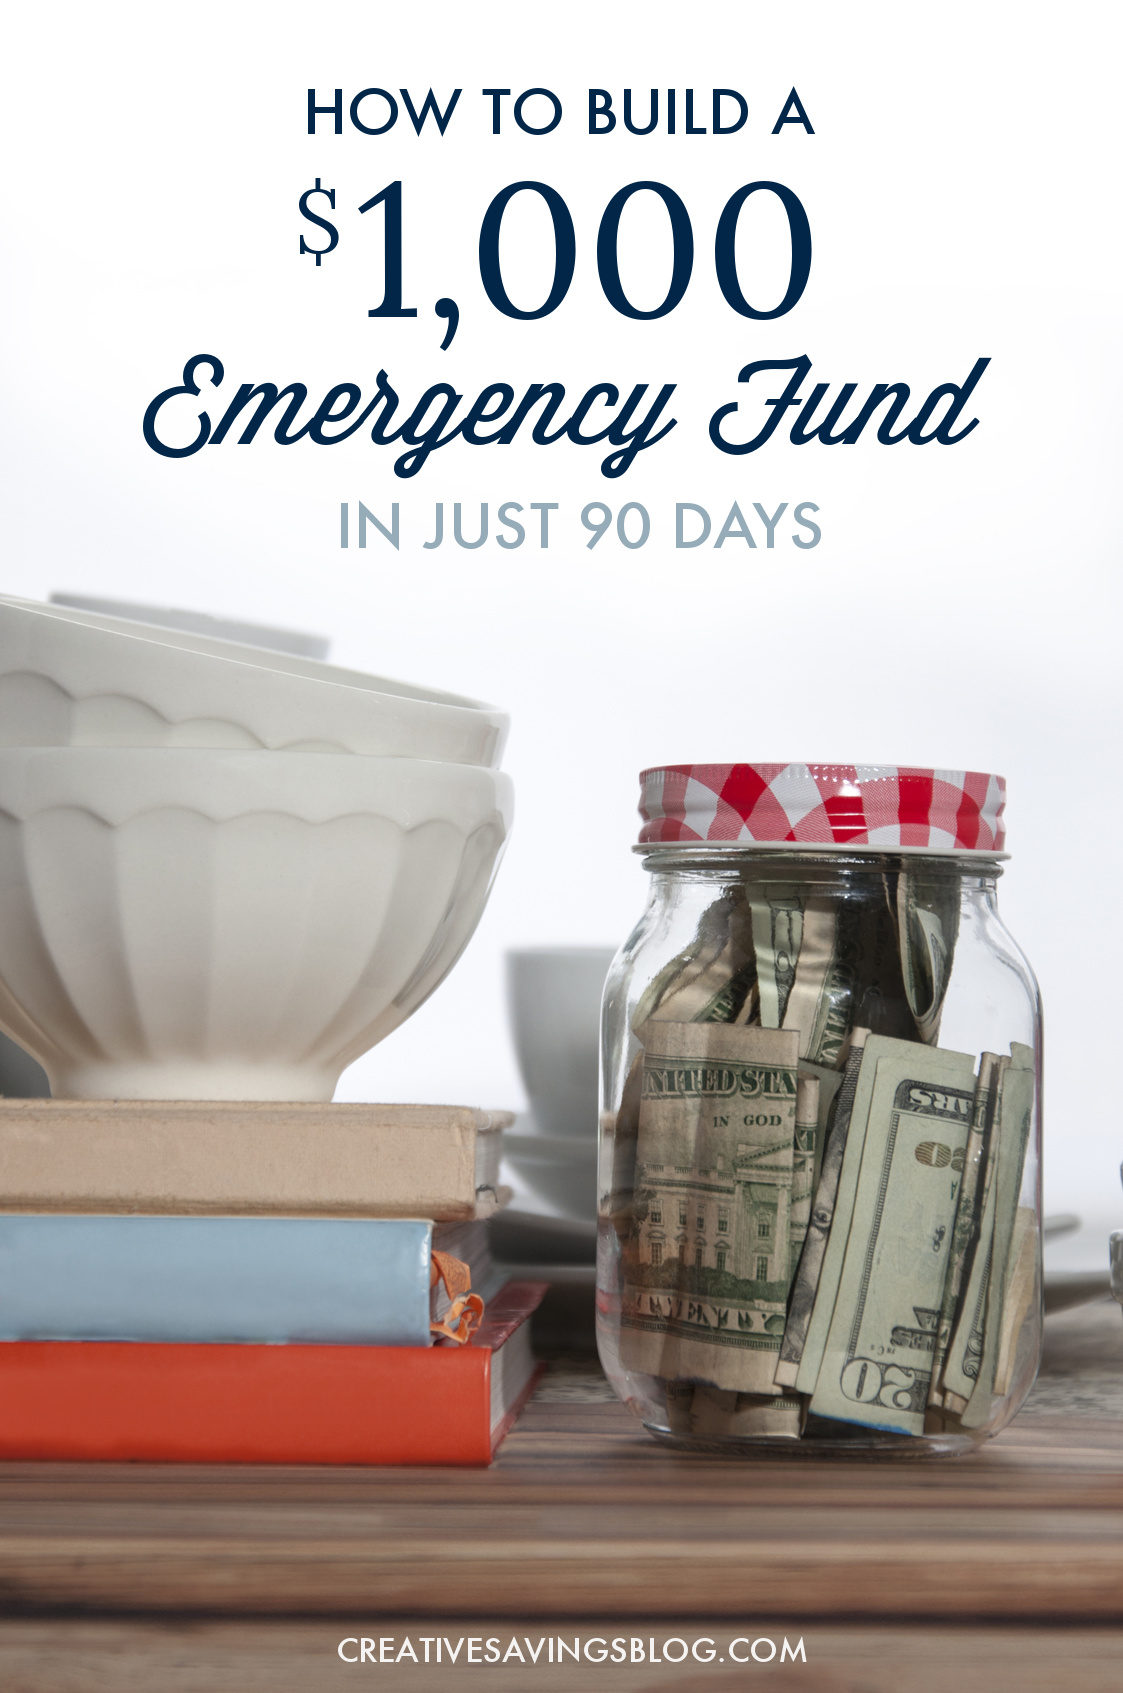 Emergency Funds are crucial to survive life's unexpected expenses, but where do you find the extra money to start one? This blogger turned her medical emergency into a money making challenge, and explains, in detail, how she earned $1,100 in just 90 days! #emergencyfund #savings #buildsavings #extramoney #budget #slushfund #sinkingfund